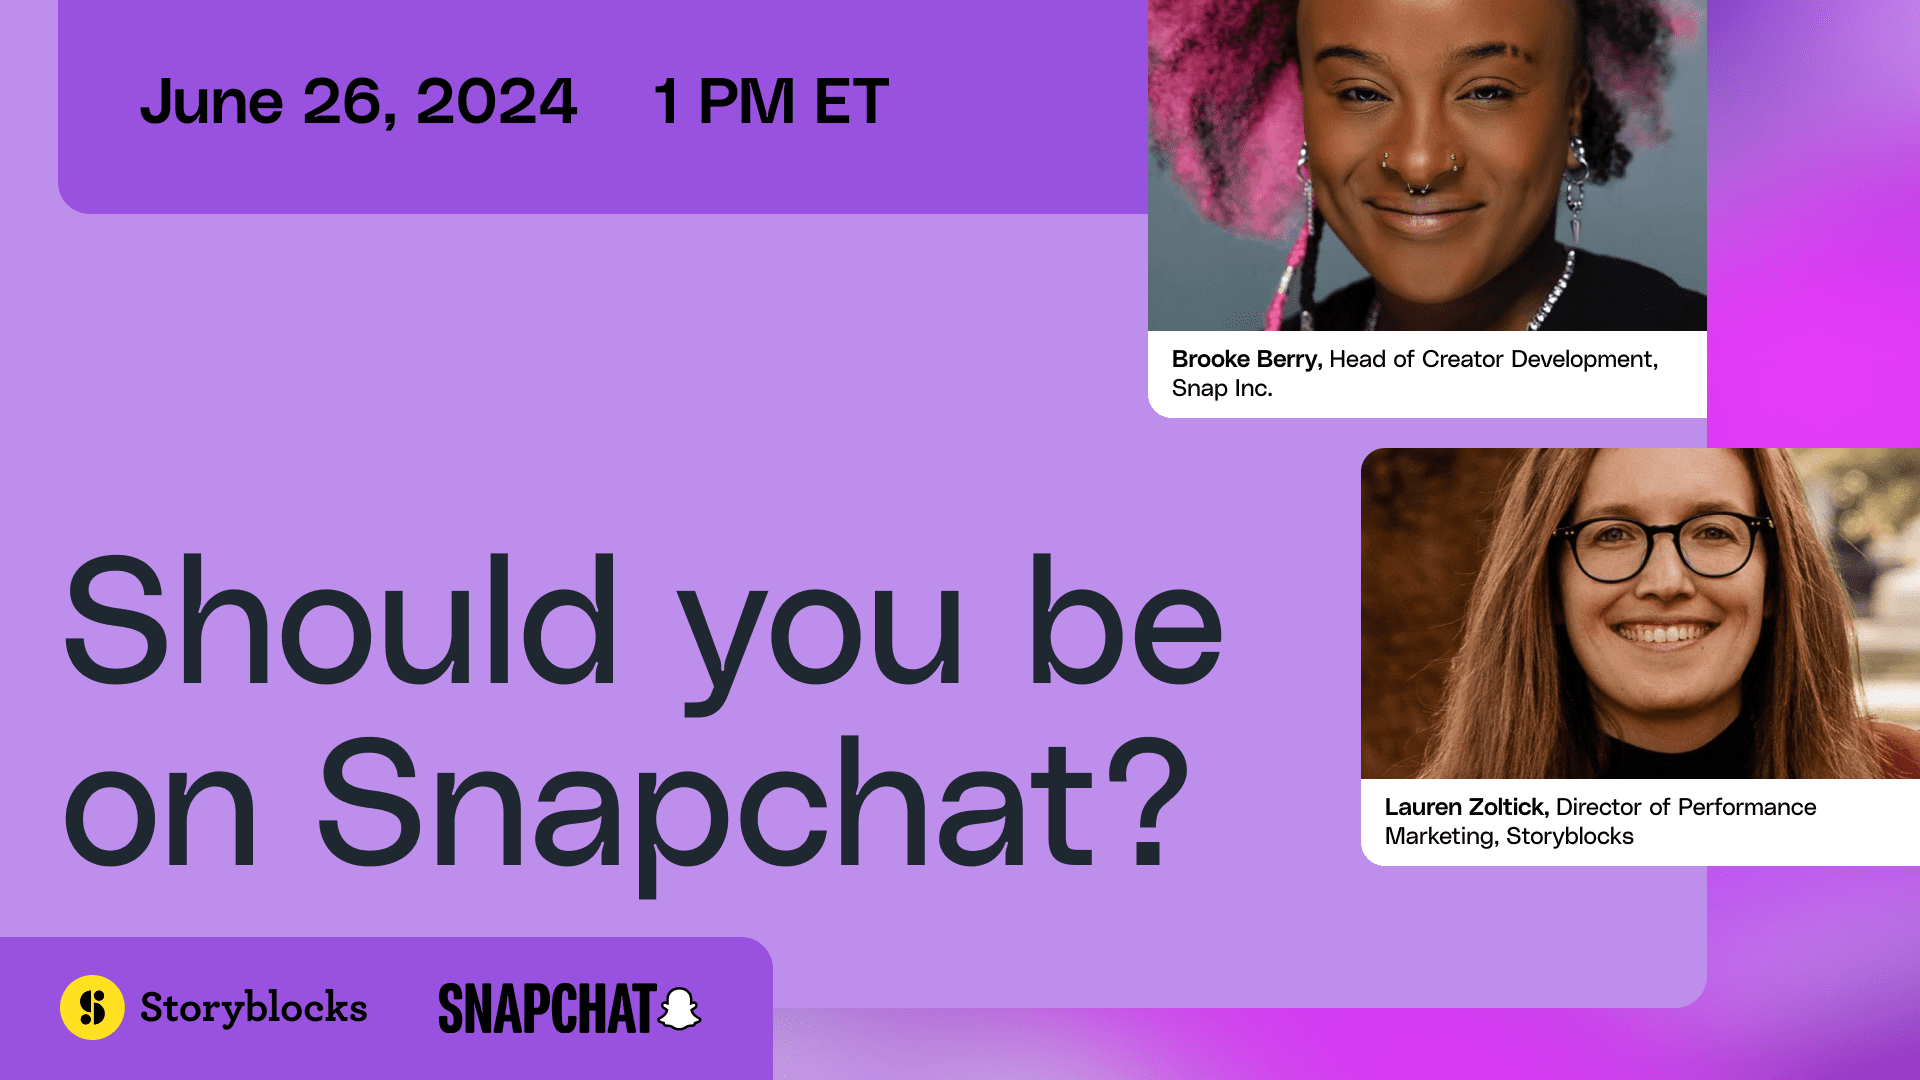 Should you be on Snapchat?